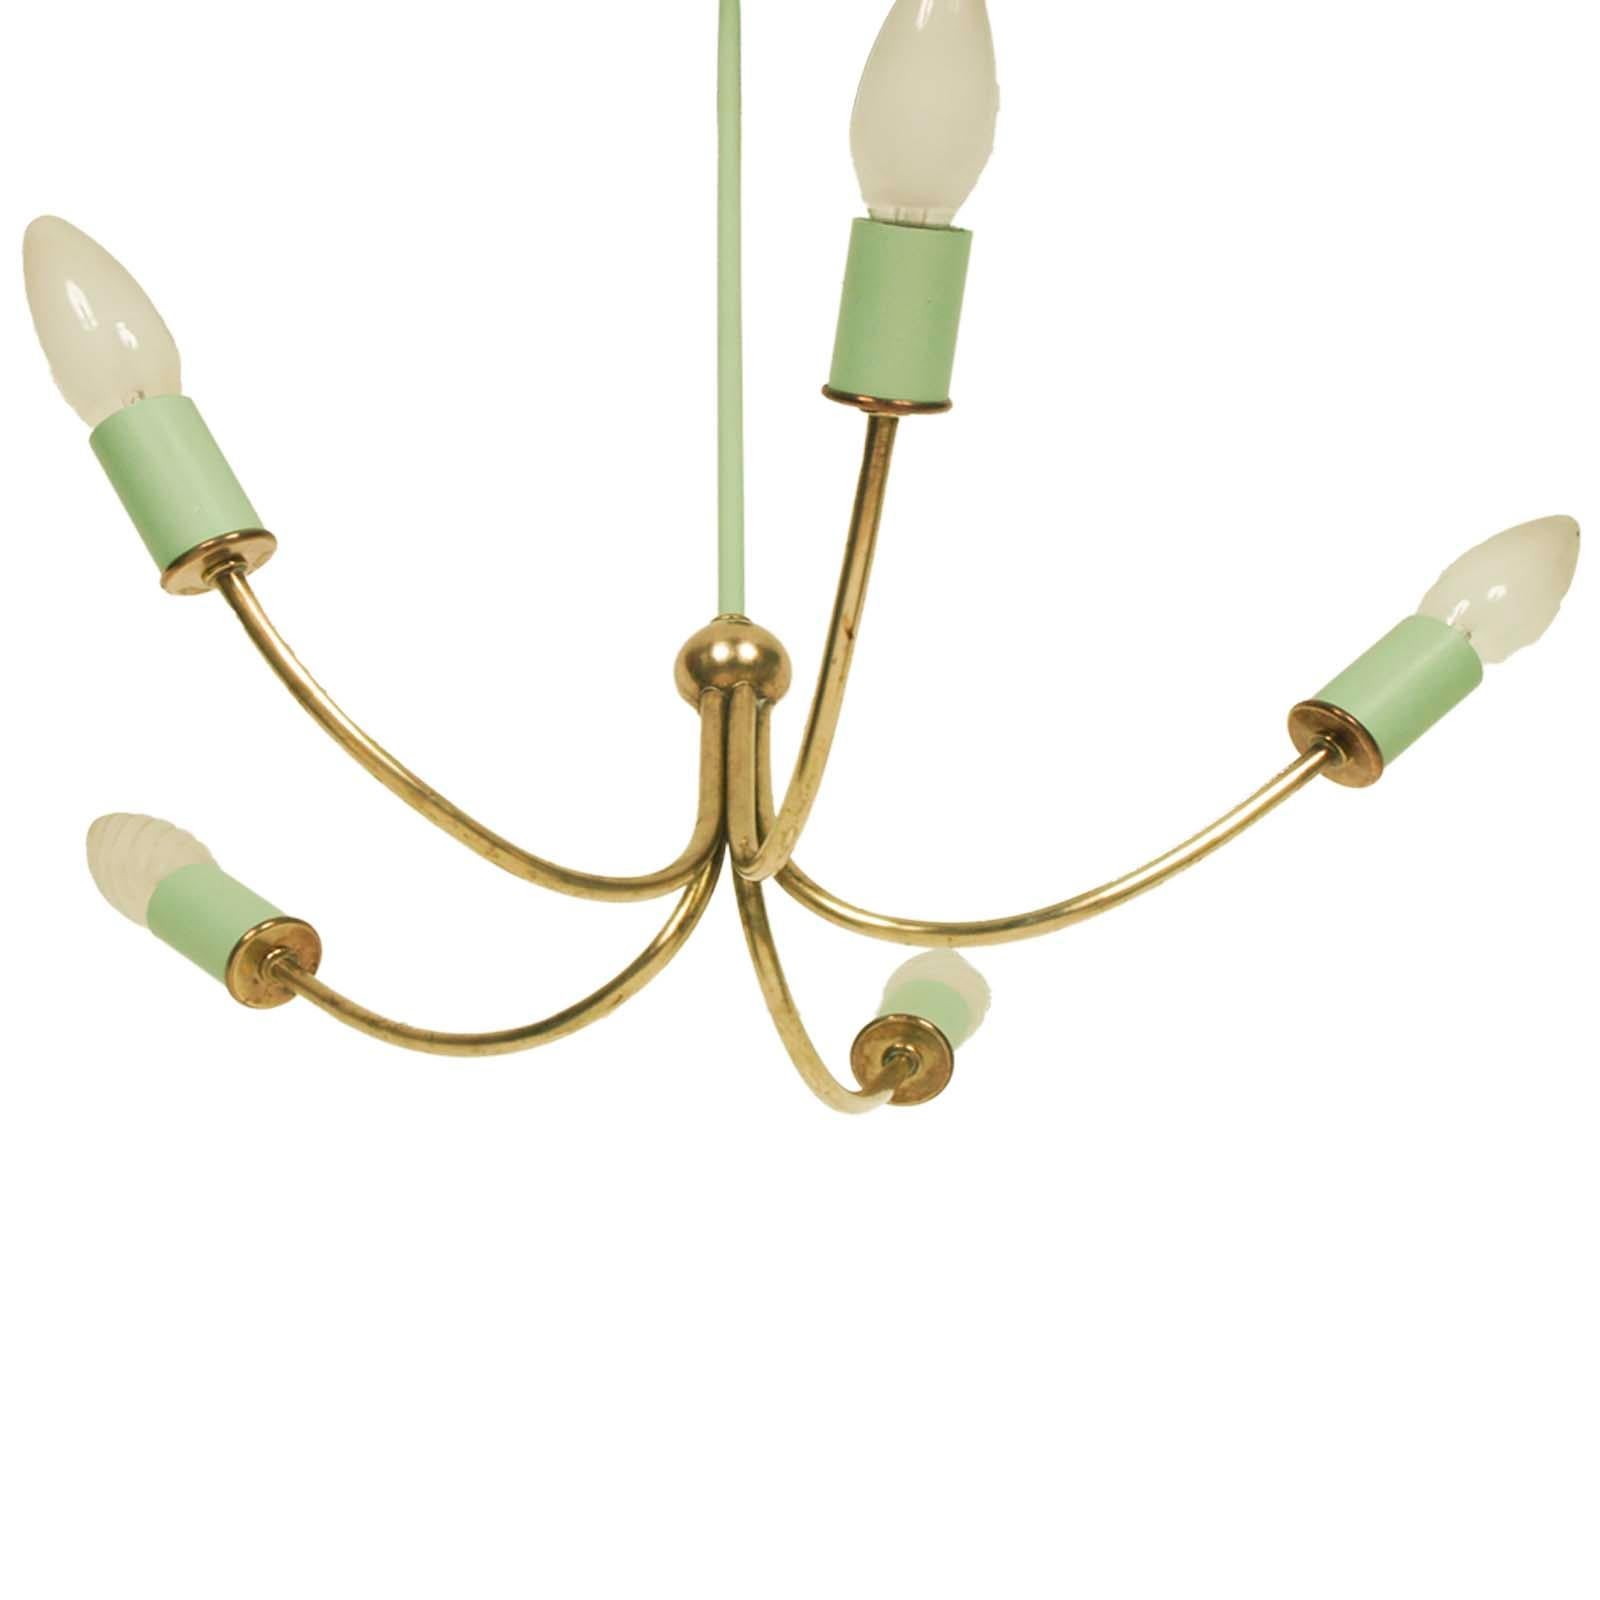 Art Deco pendant lamp, gilded brass and green painted brass with five arms. Minimalist design. Electrical system redone and functional, ready for use.


Measure in cm. Height 80, diameter 45.